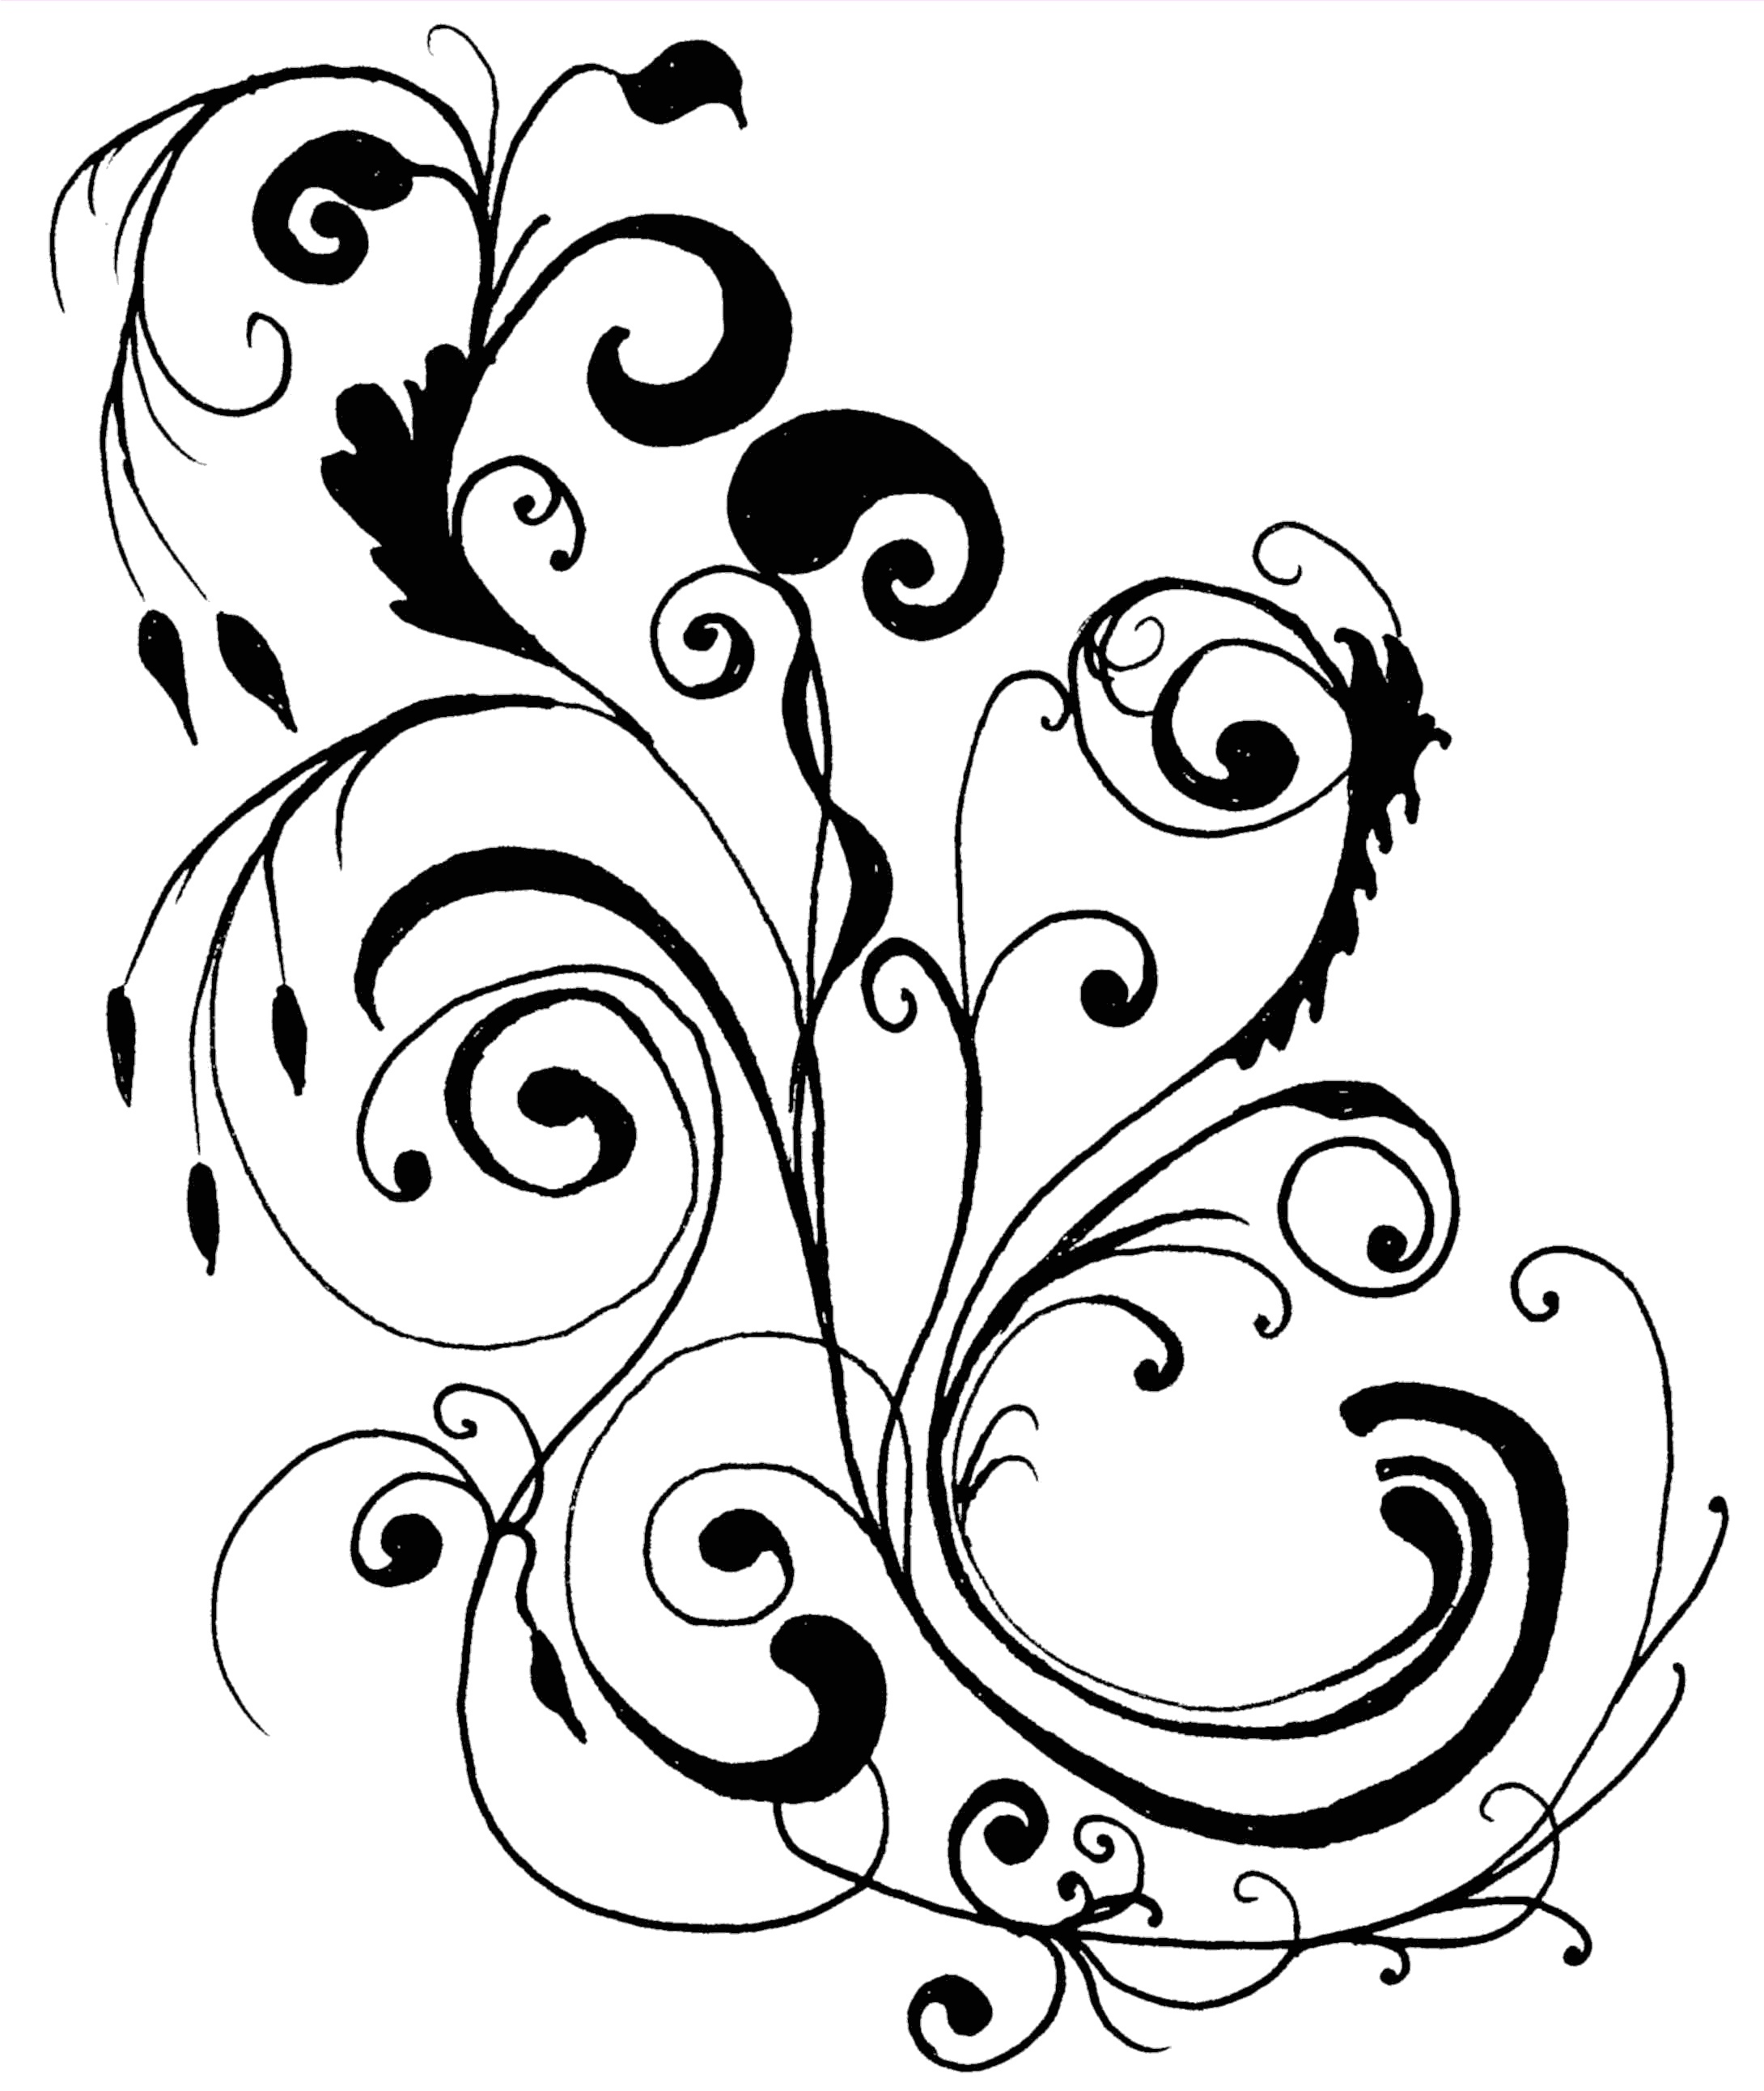 Floral flower clipart free images 2